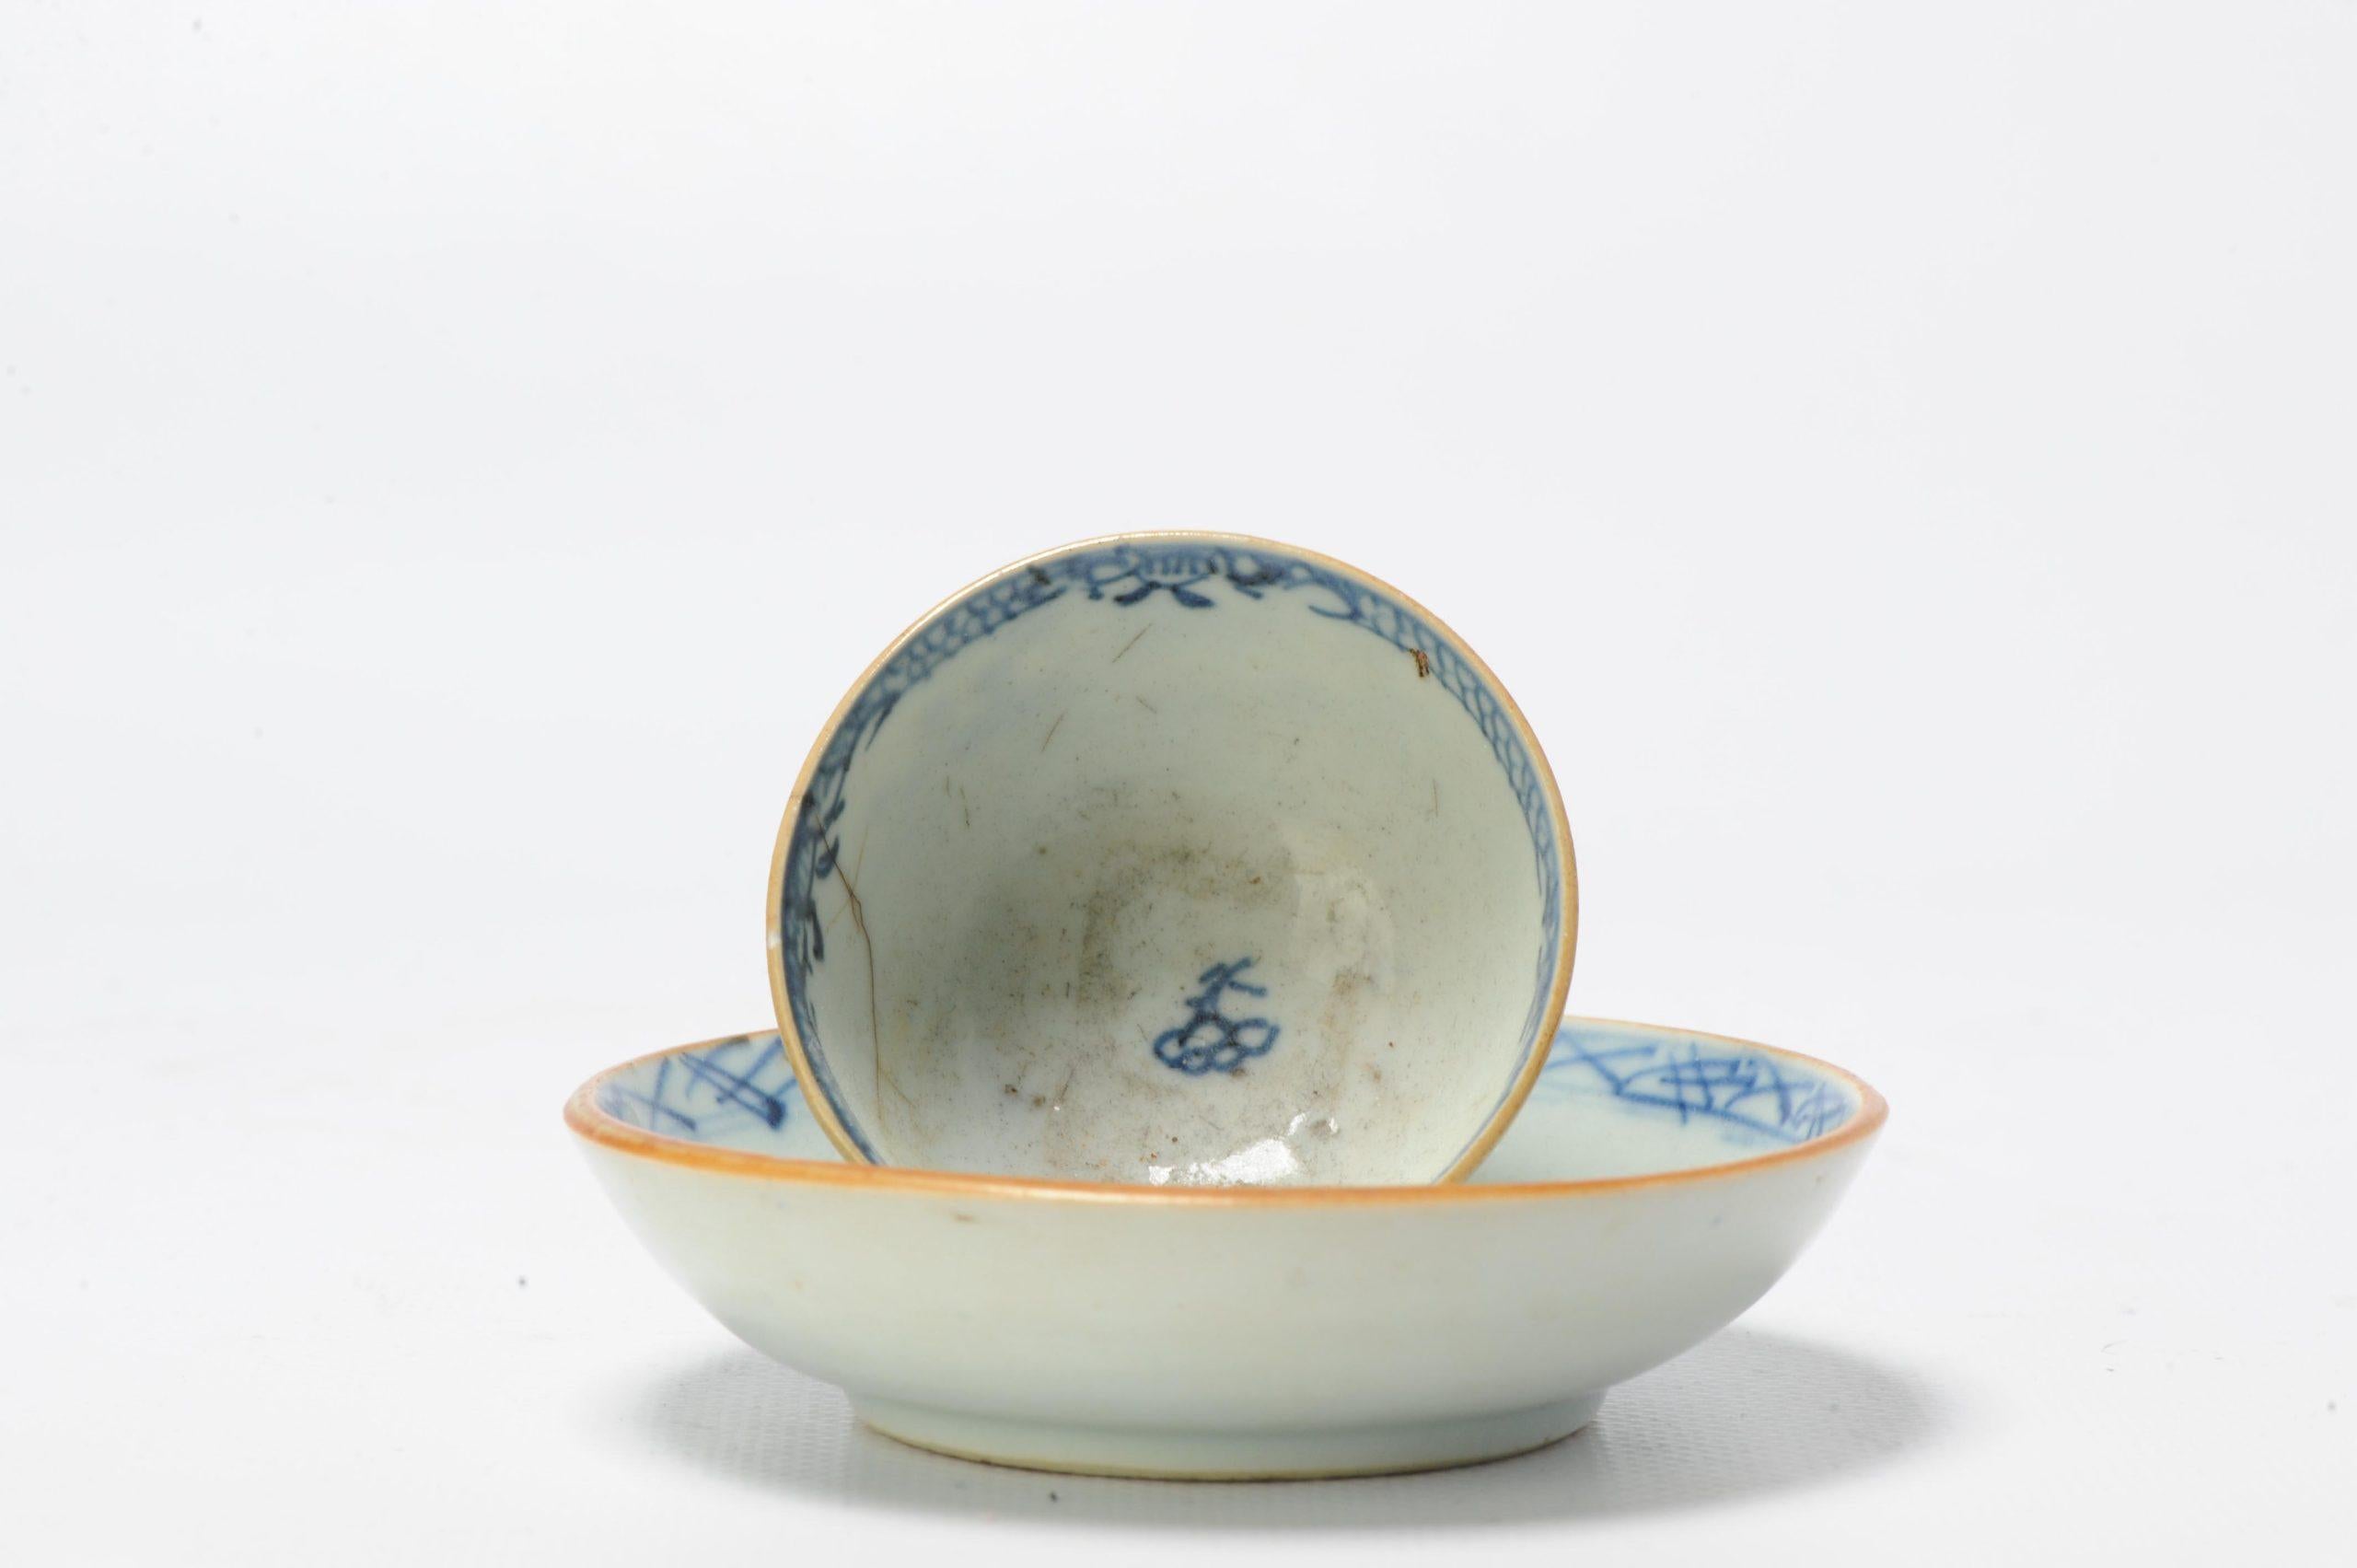 18th century blue and white cup and saucer, in moulded form, with a scene of a pagoda

Landscape.

Additional information:
Material: Porcelain & Pottery
Type: Bowls, Tea/Coffee Drinking: Bowls, Cups & Teapots
Color: Blue & White
Japanese Style: